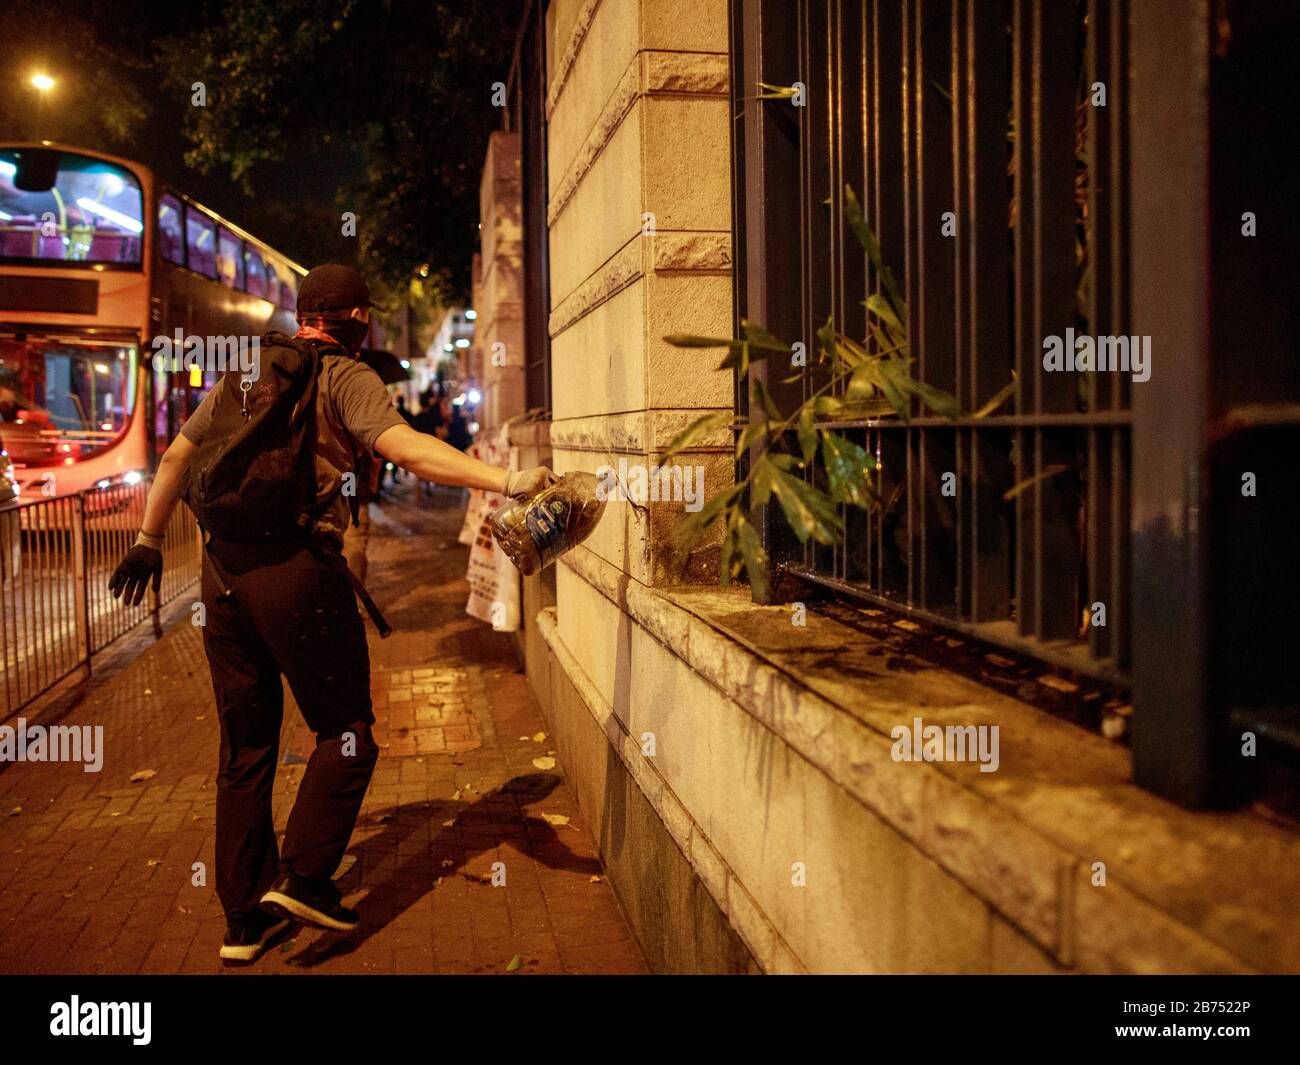 A man pours inflammable liquid outside a police station. Hundreds of people gather to protest a high school student shot with live round by police yesterday 1 Oct 2019. Some protesters later set the gate of a police station on fire in Hong Kong. Stock Photo